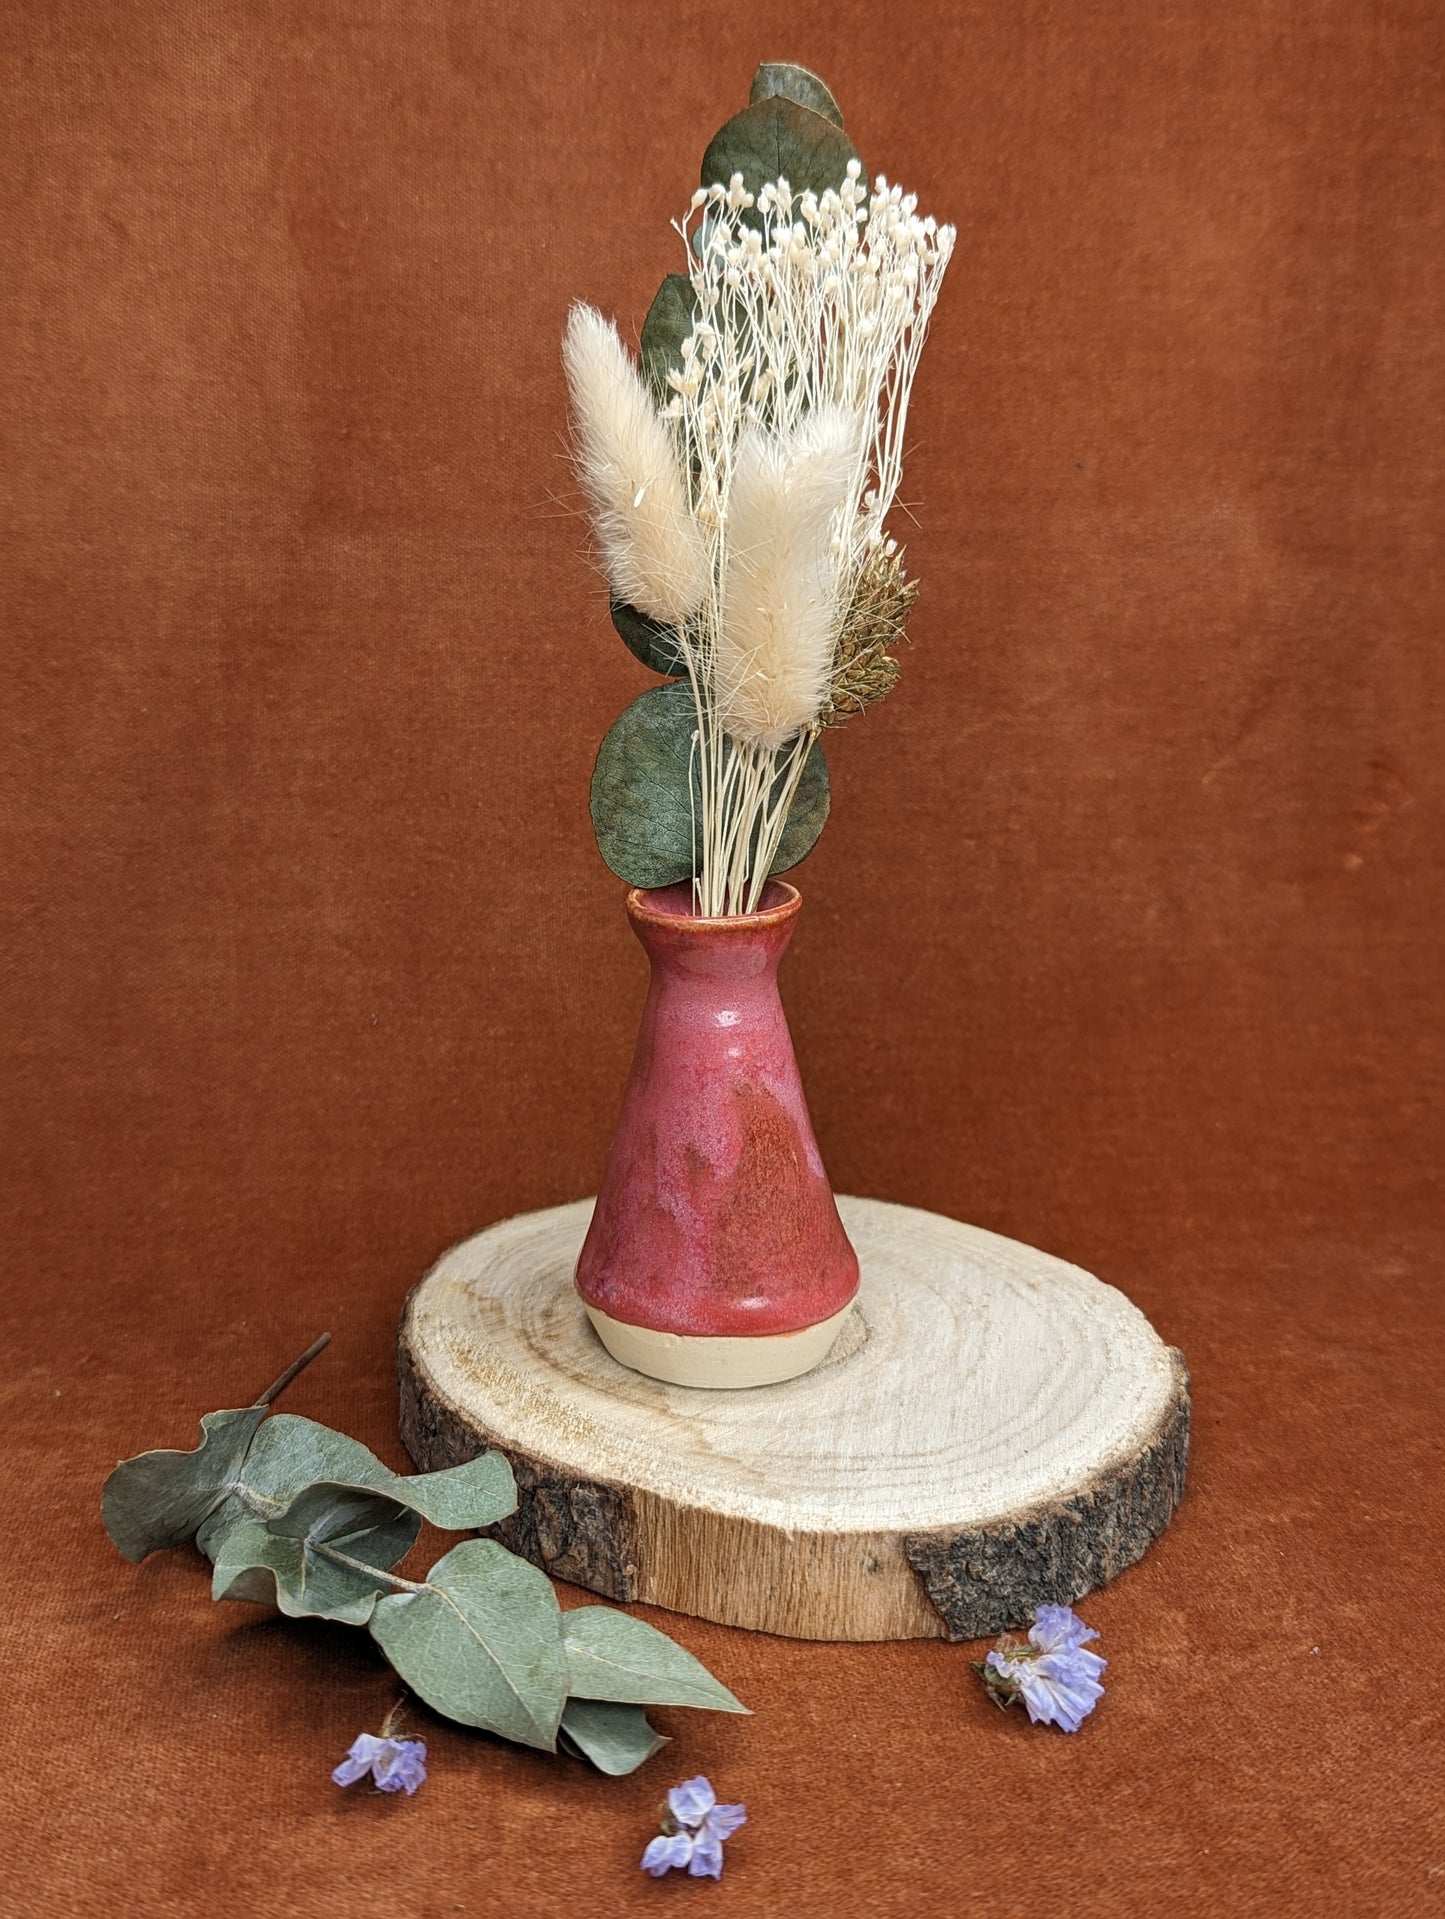 Mini Vase with Dried Flowers by Genuine Quirk